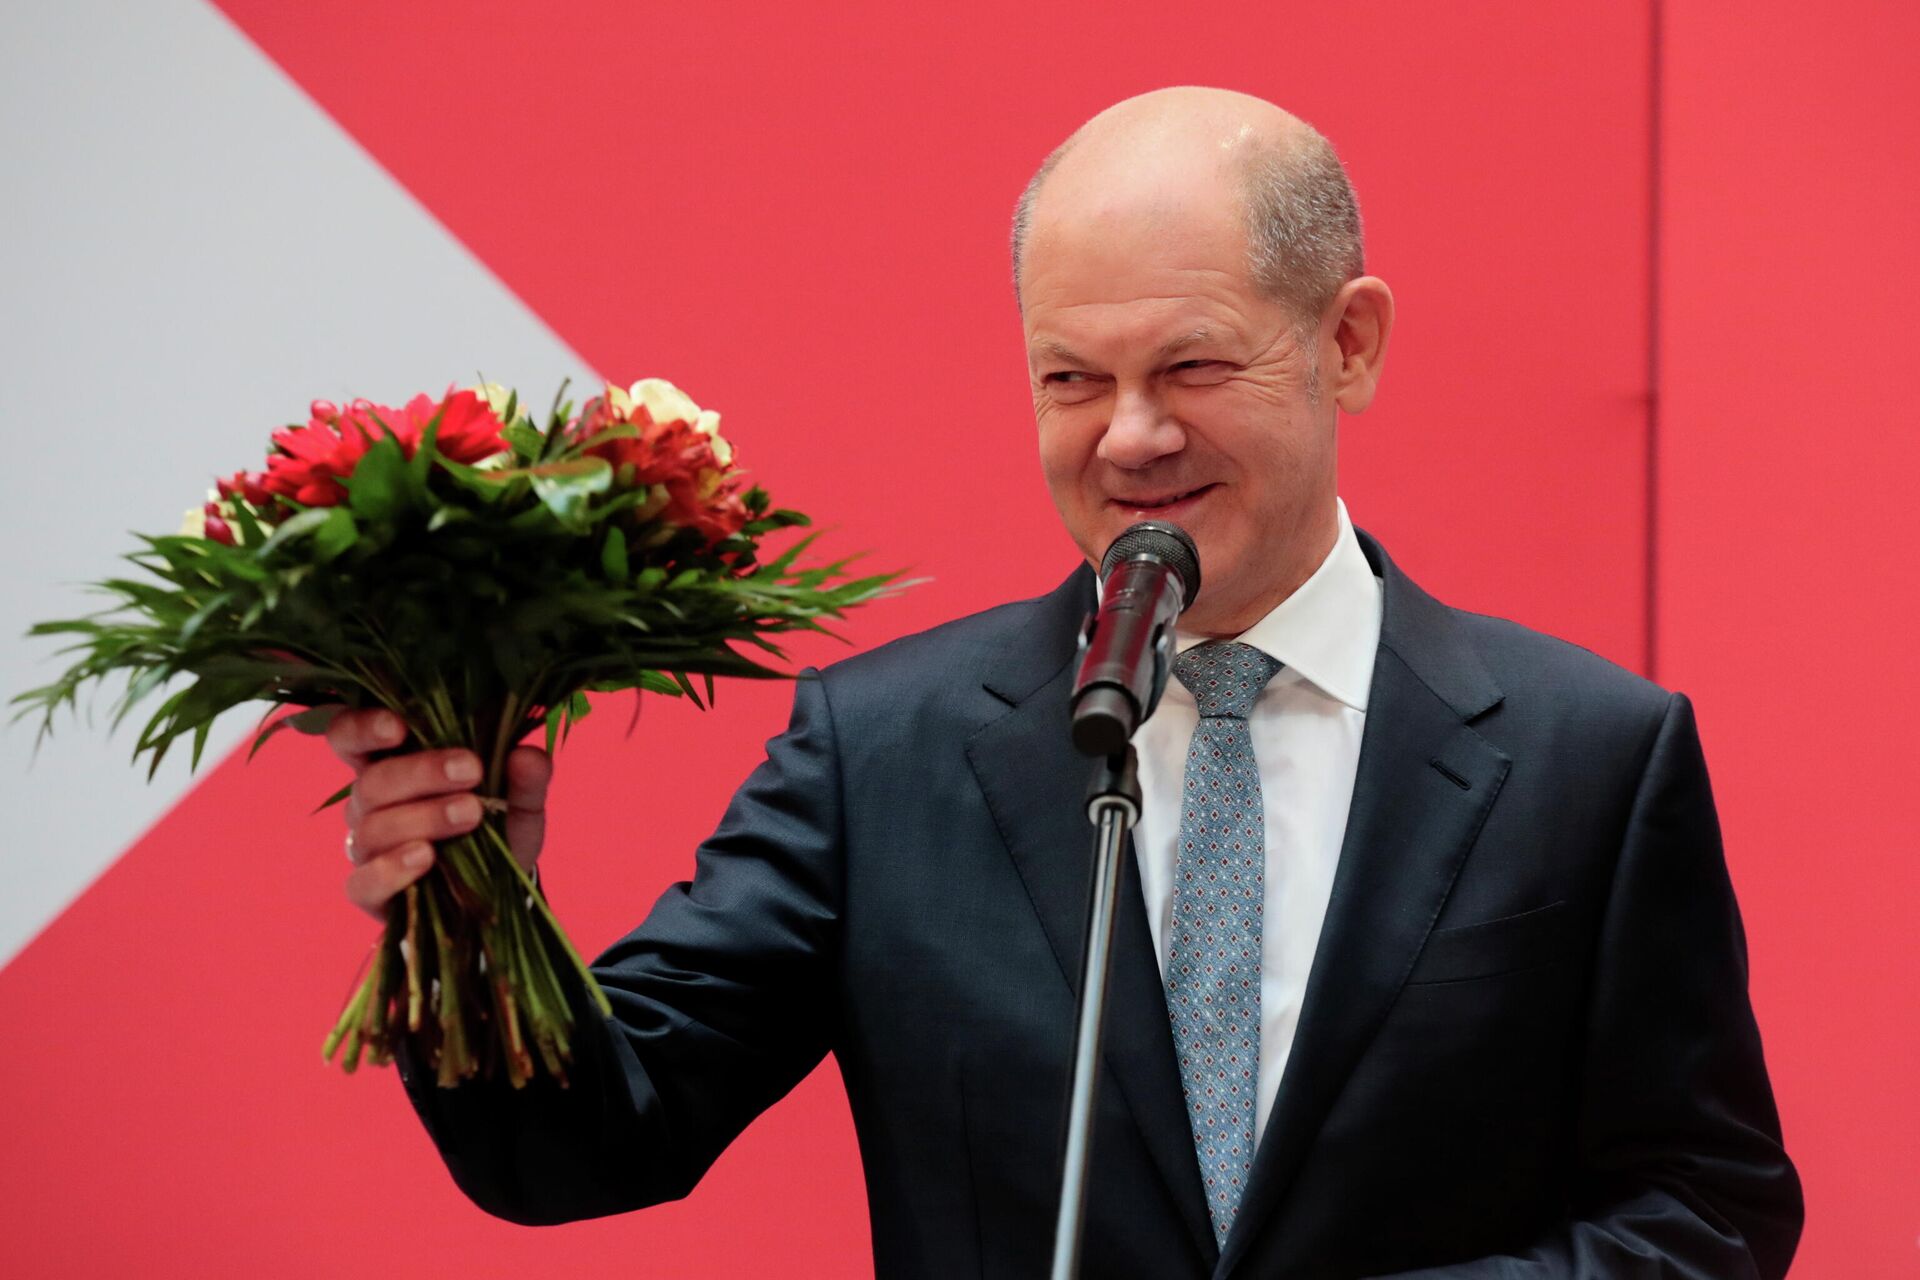 Social Democratic Party (SPD) leader and top candidate for chancellor Olaf Scholz receives flowers, one day after the general elections in Berlin, Germany, September 27, 2021 - Sputnik International, 1920, 27.09.2021